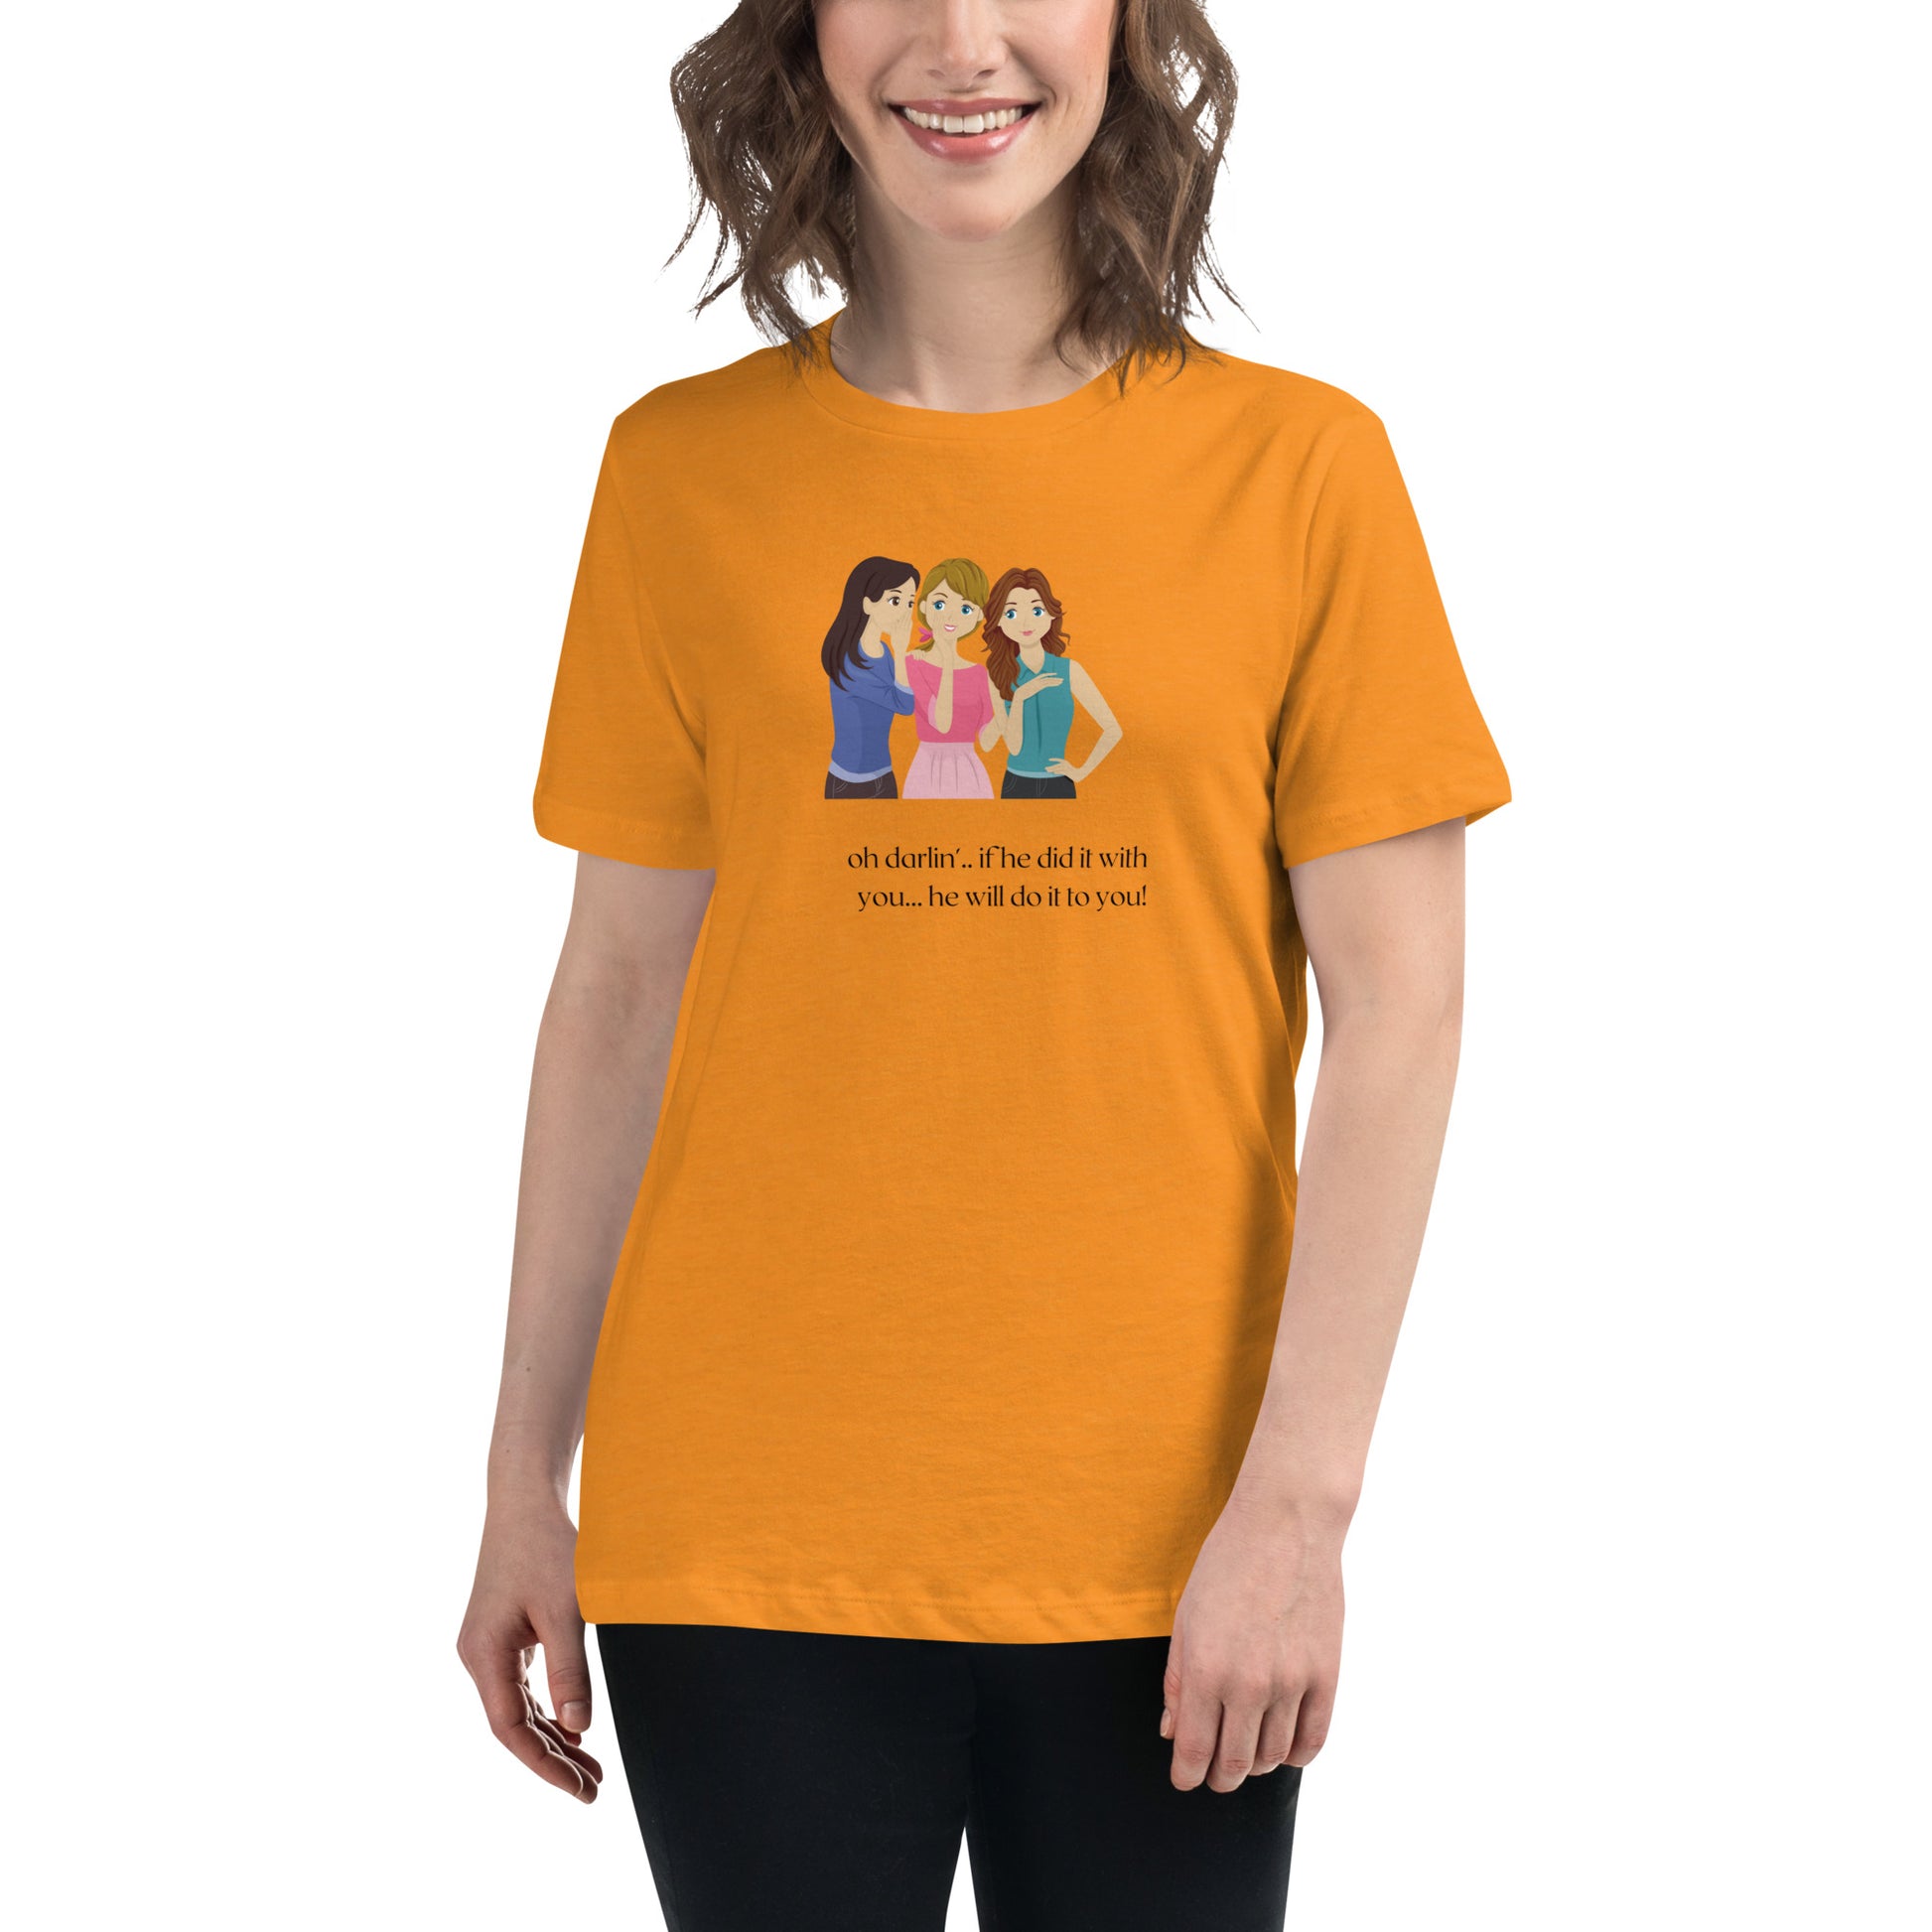 Women's Relaxed T-Shirt - If he Ladies - If He did it with You He'll Do it To You T-shirt Stylin' Spirit Heather Marmalade S 